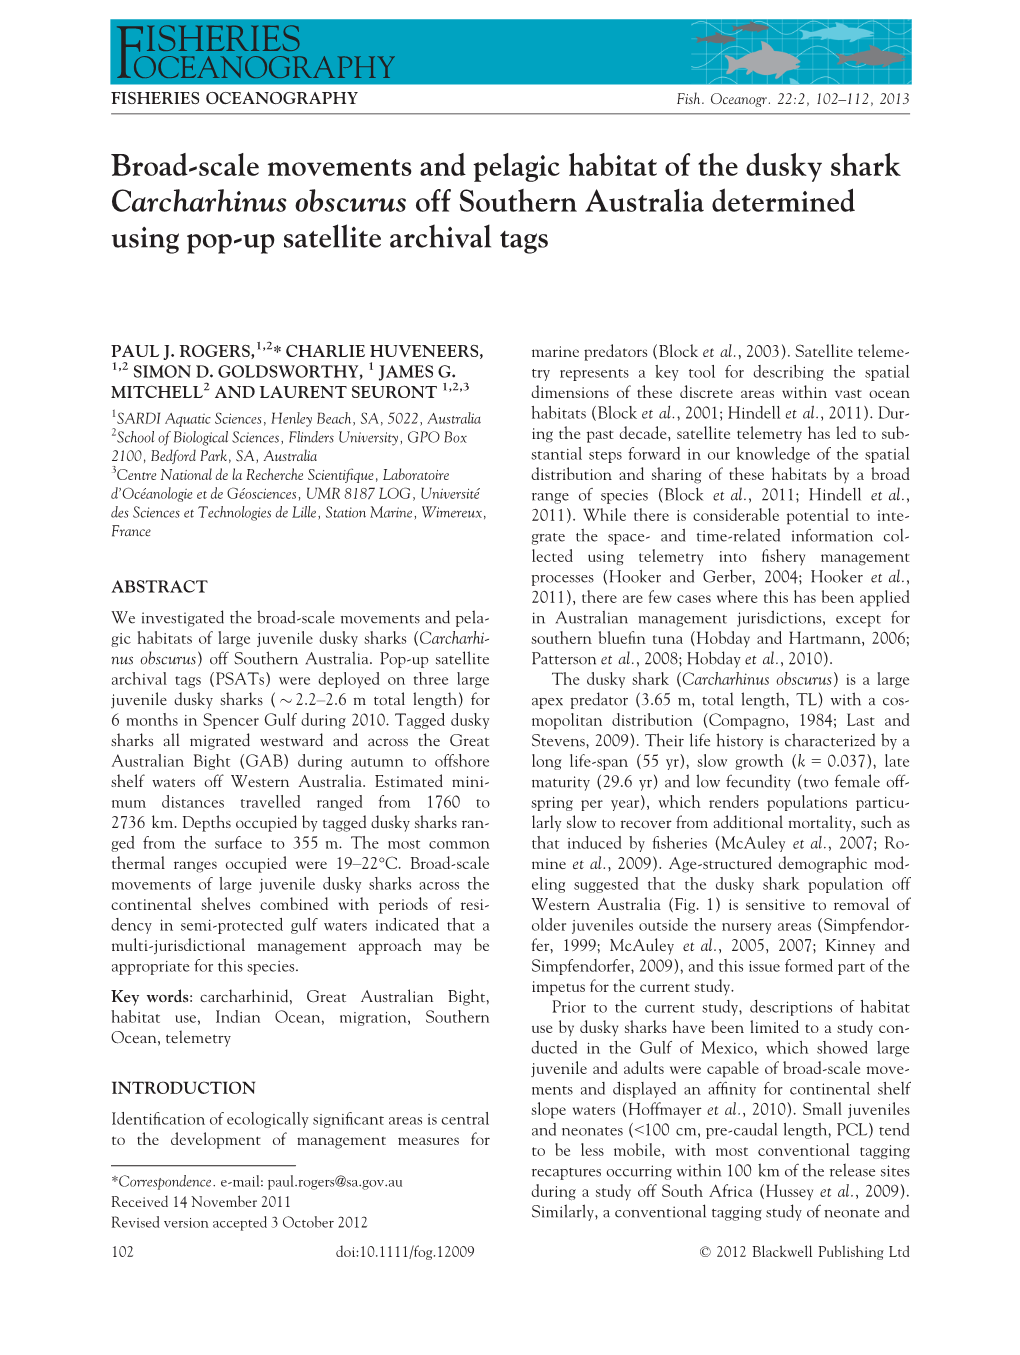 Broadscale Movements and Pelagic Habitat of the Dusky Shark Carcharhinus Obscurus Off Southern Australia Determined Using Popup